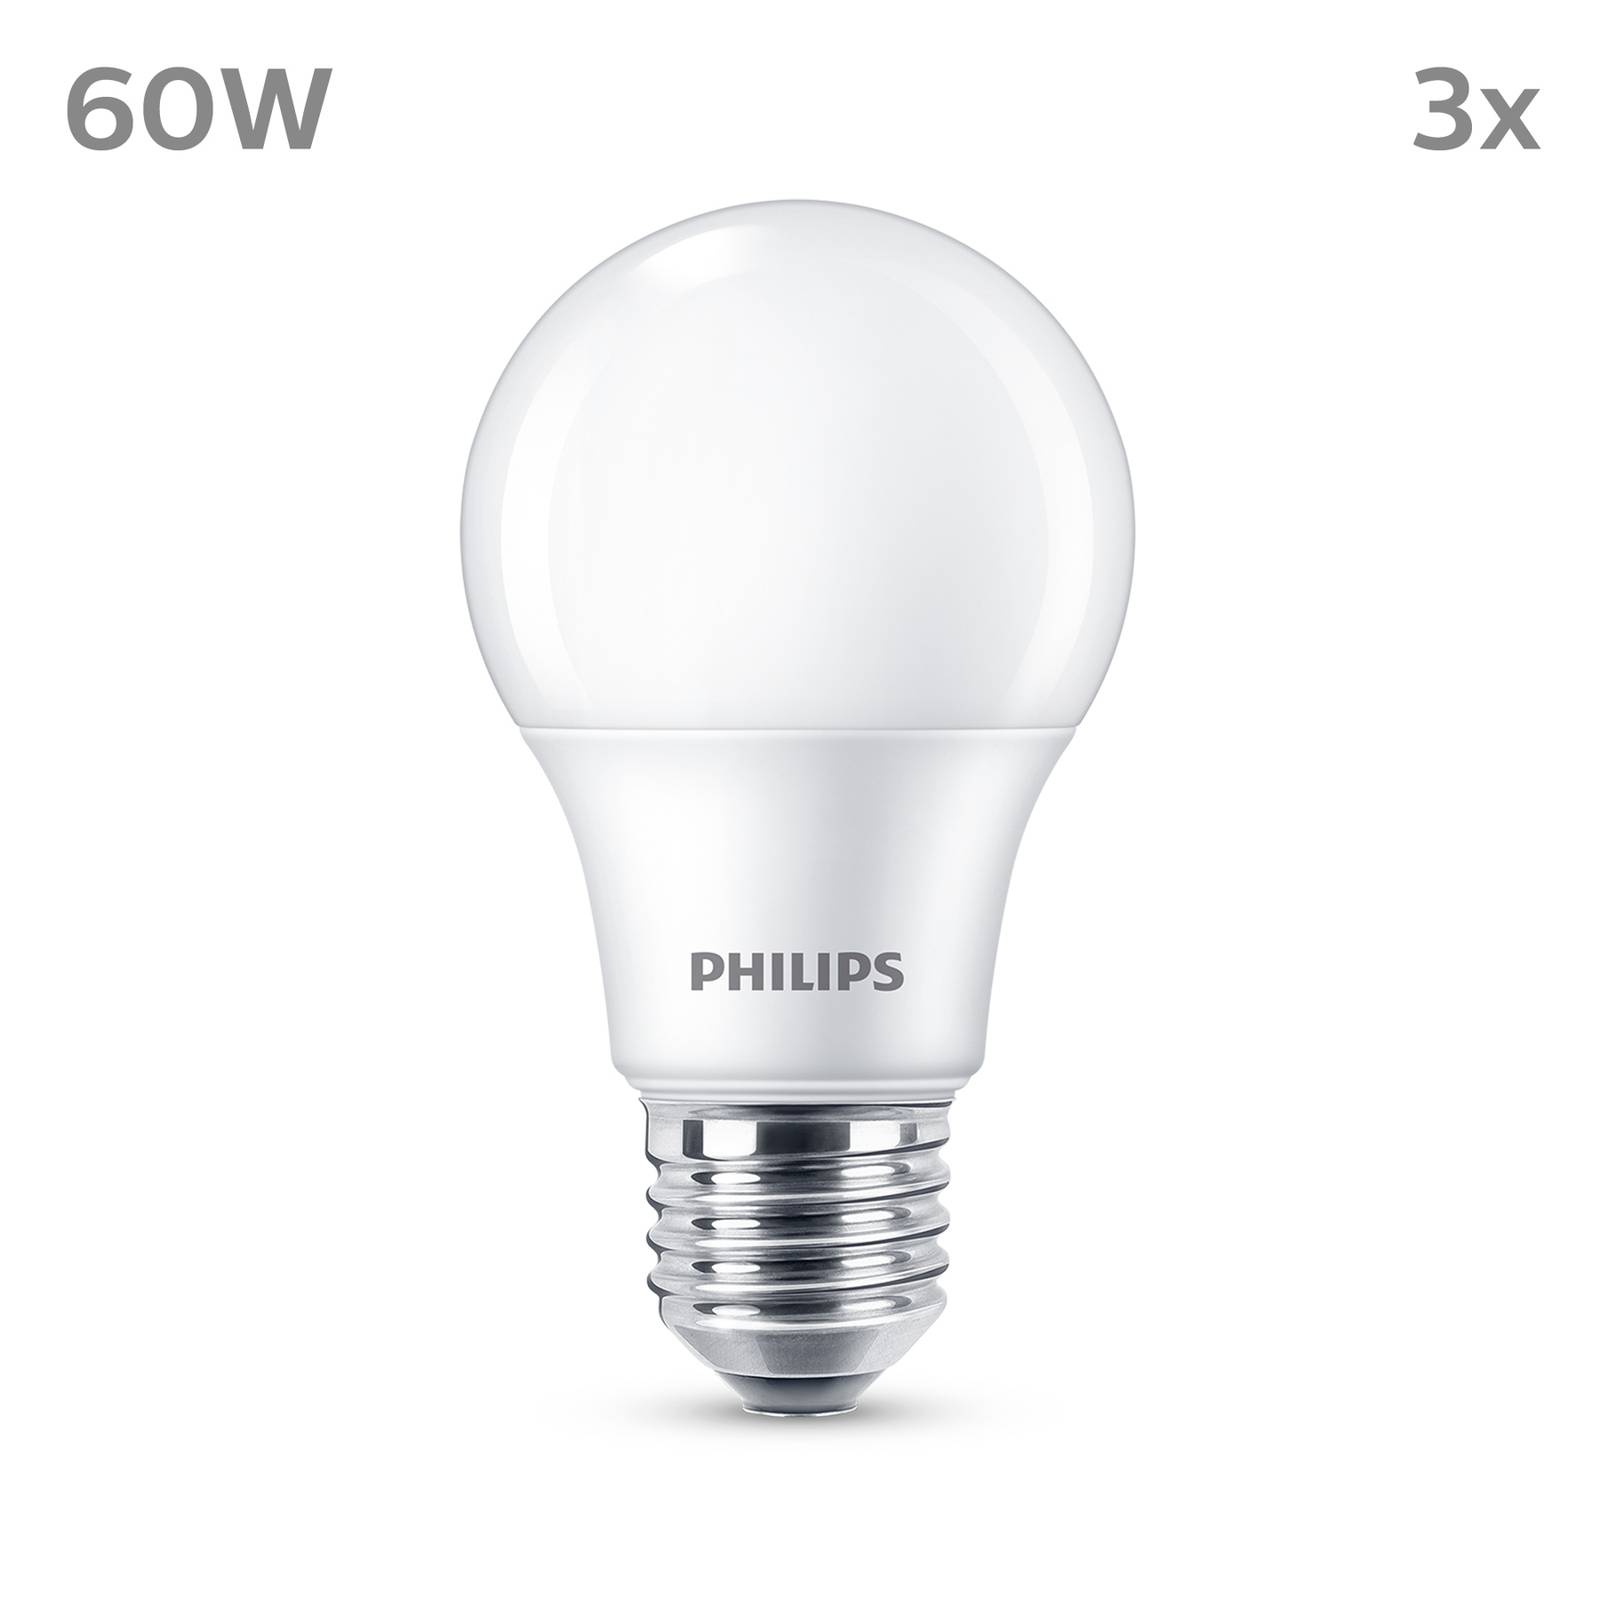 Philips ampoule LED E27 8W 806lm 2 700K mate x3 Philips